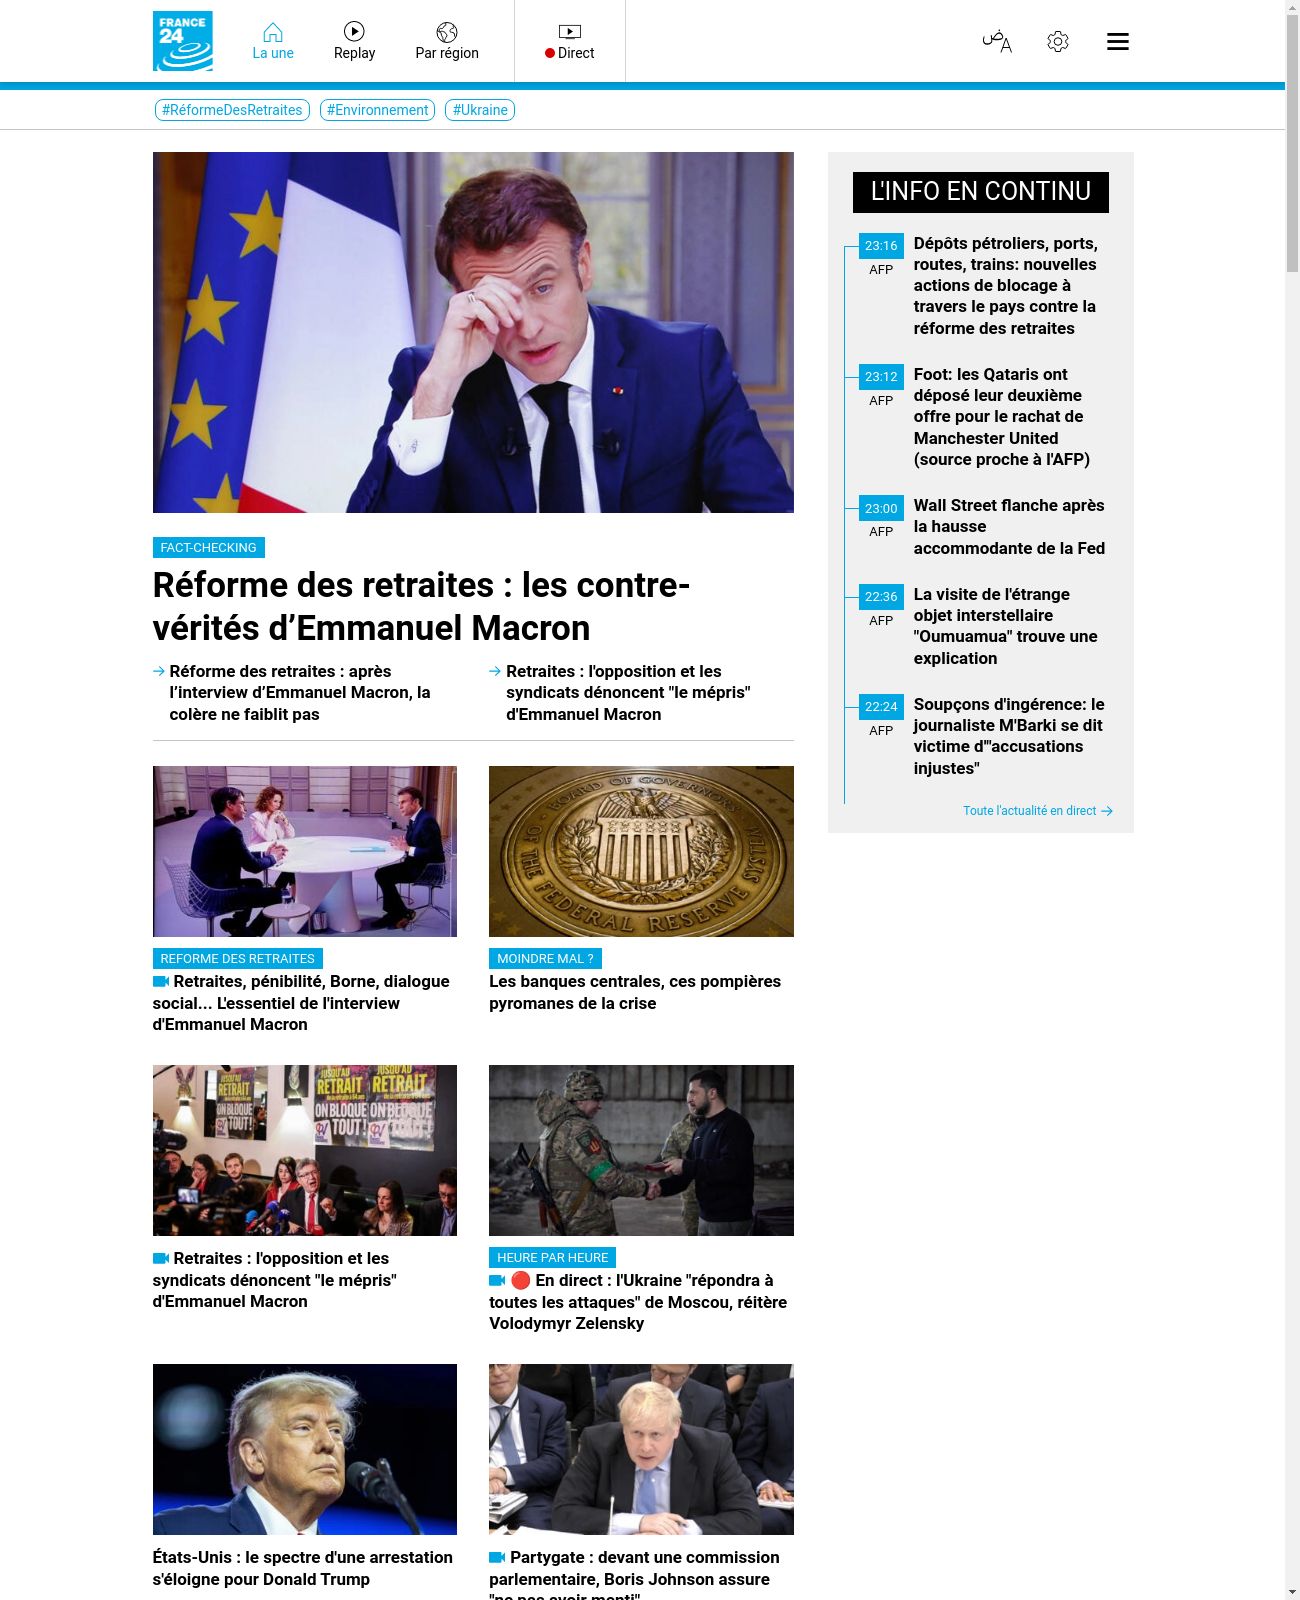 FRANCE 24 at 2023-03-22 23:51:21+01:00 local time